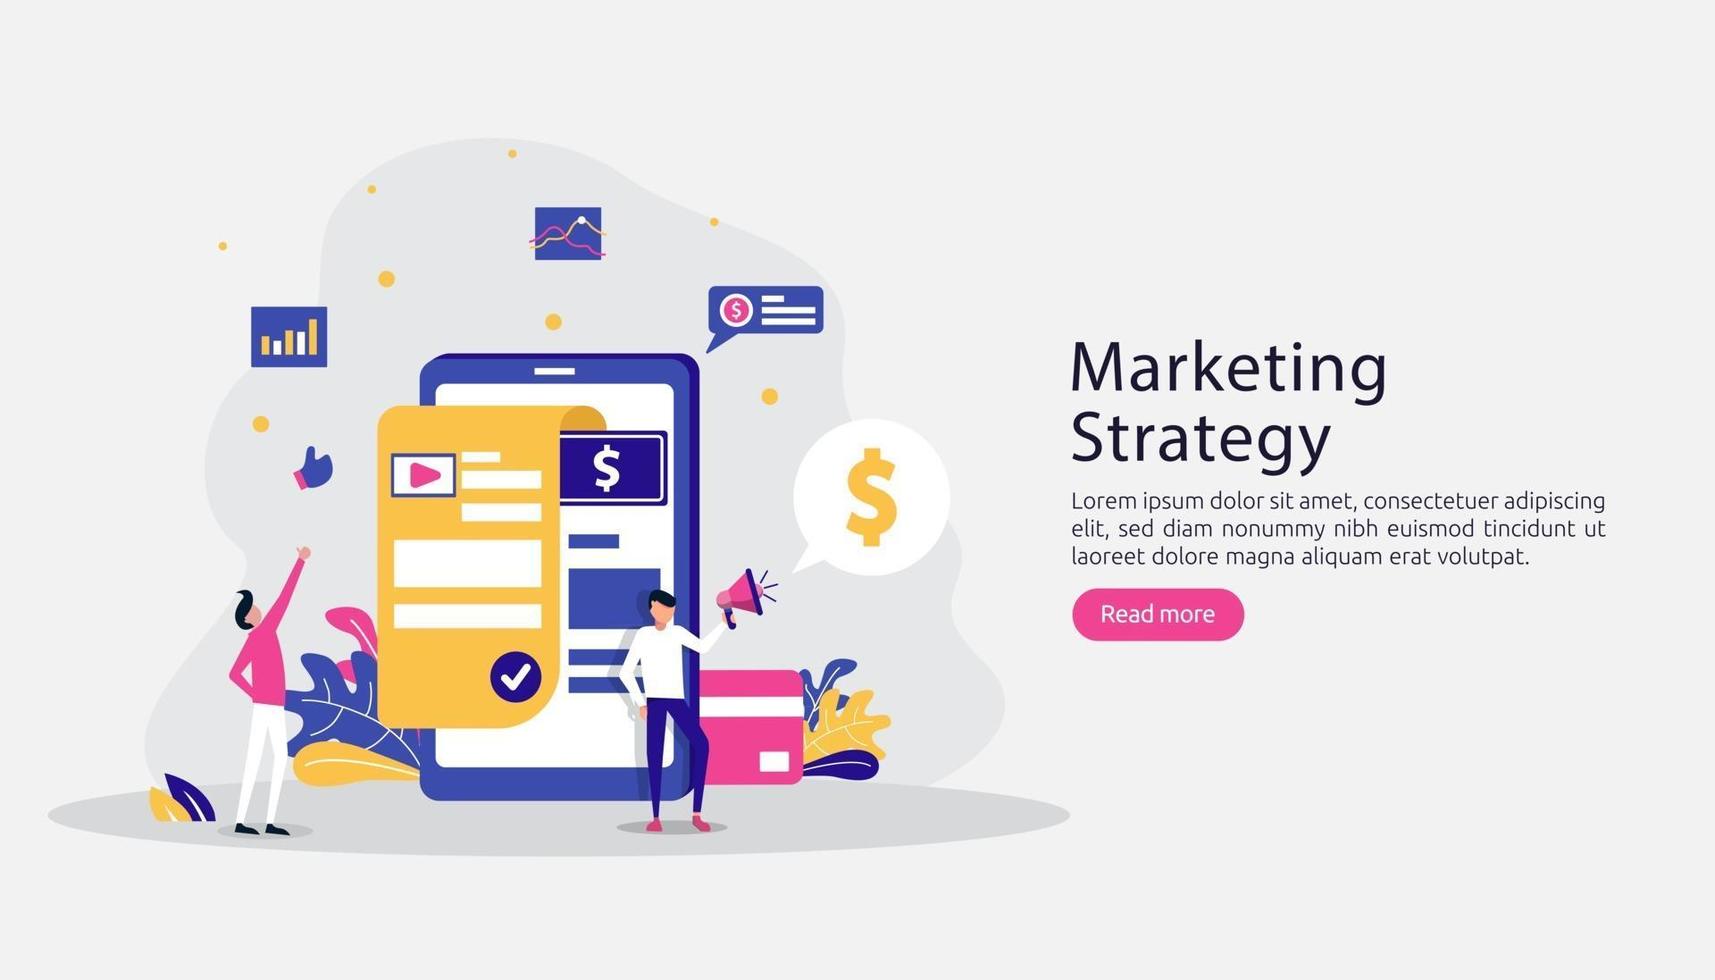 affiliate digital marketing strategy concept. refer a friend with people character sharing referral business partnership and earn money online. template for web landing page, banner, presentation vector